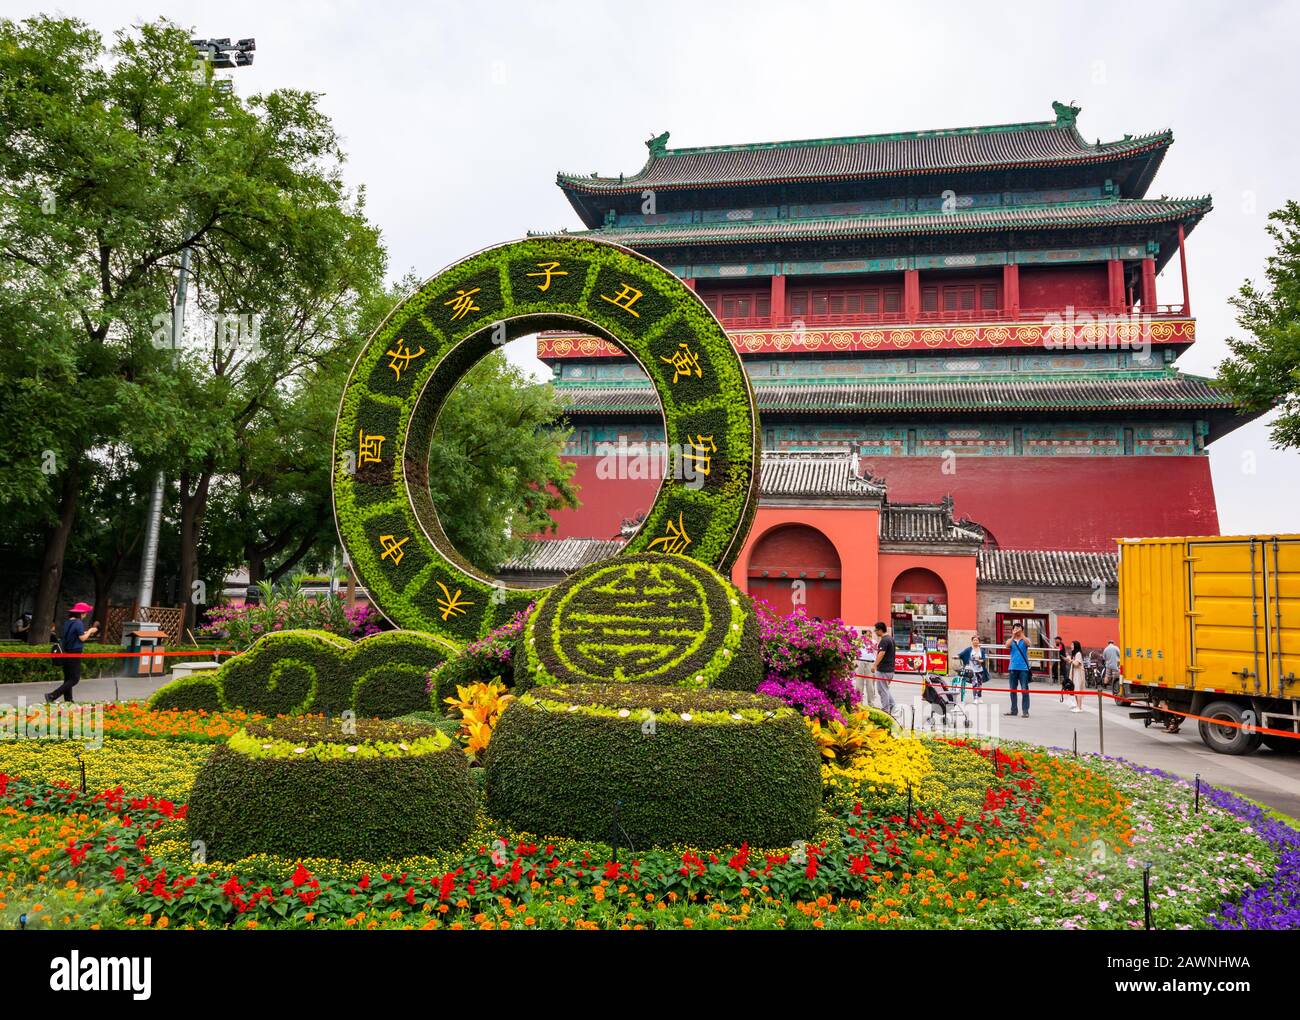 Drum Tower or Gulou with floral display, Beijing, China, Asia Stock Photo